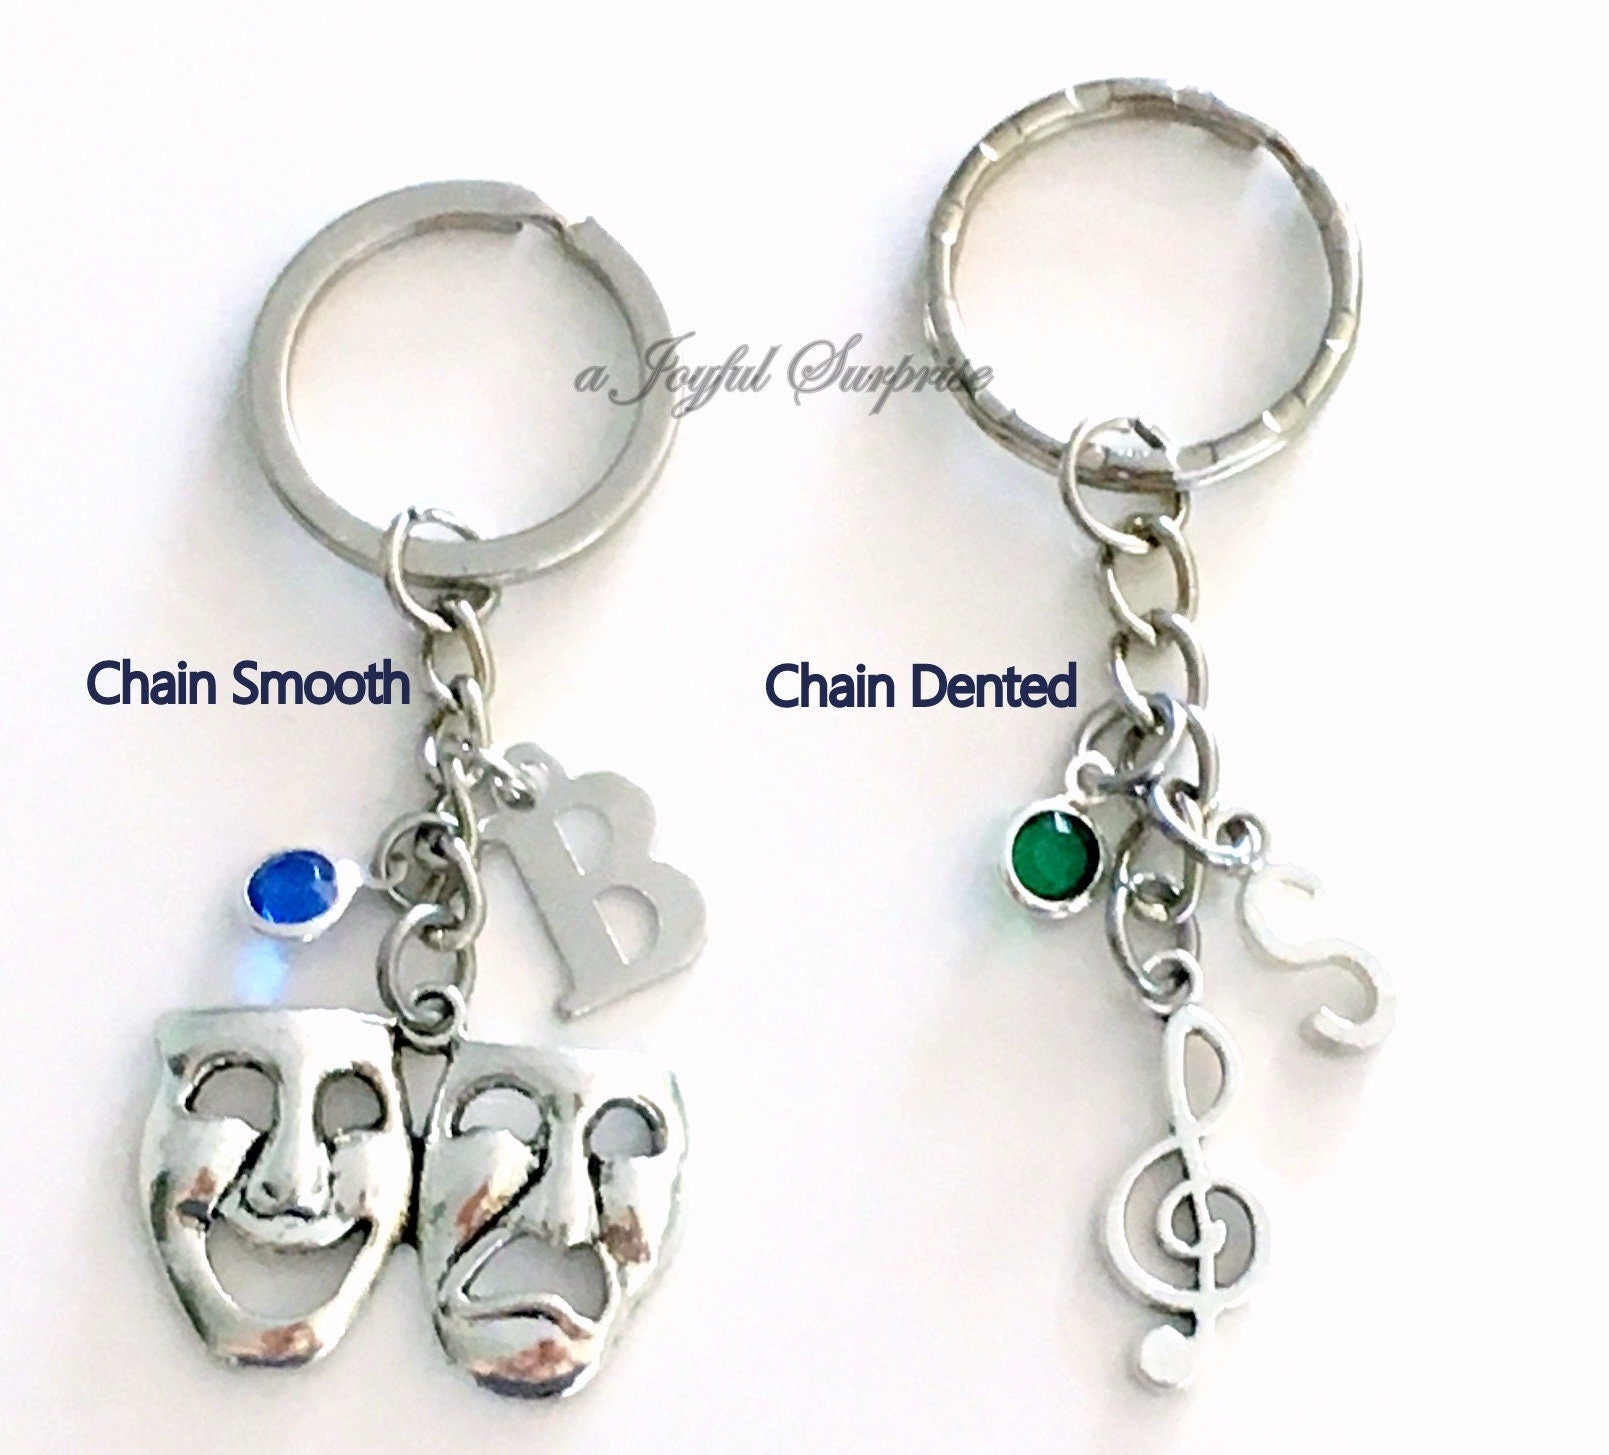 A Joyful Surprise Design Your Own Key Chain, Create Custom Keychain, Any #charms from My Shop You Want 2 3 4 5 6 7 8 9 10 Customized Personalised or Planner 7 Charms